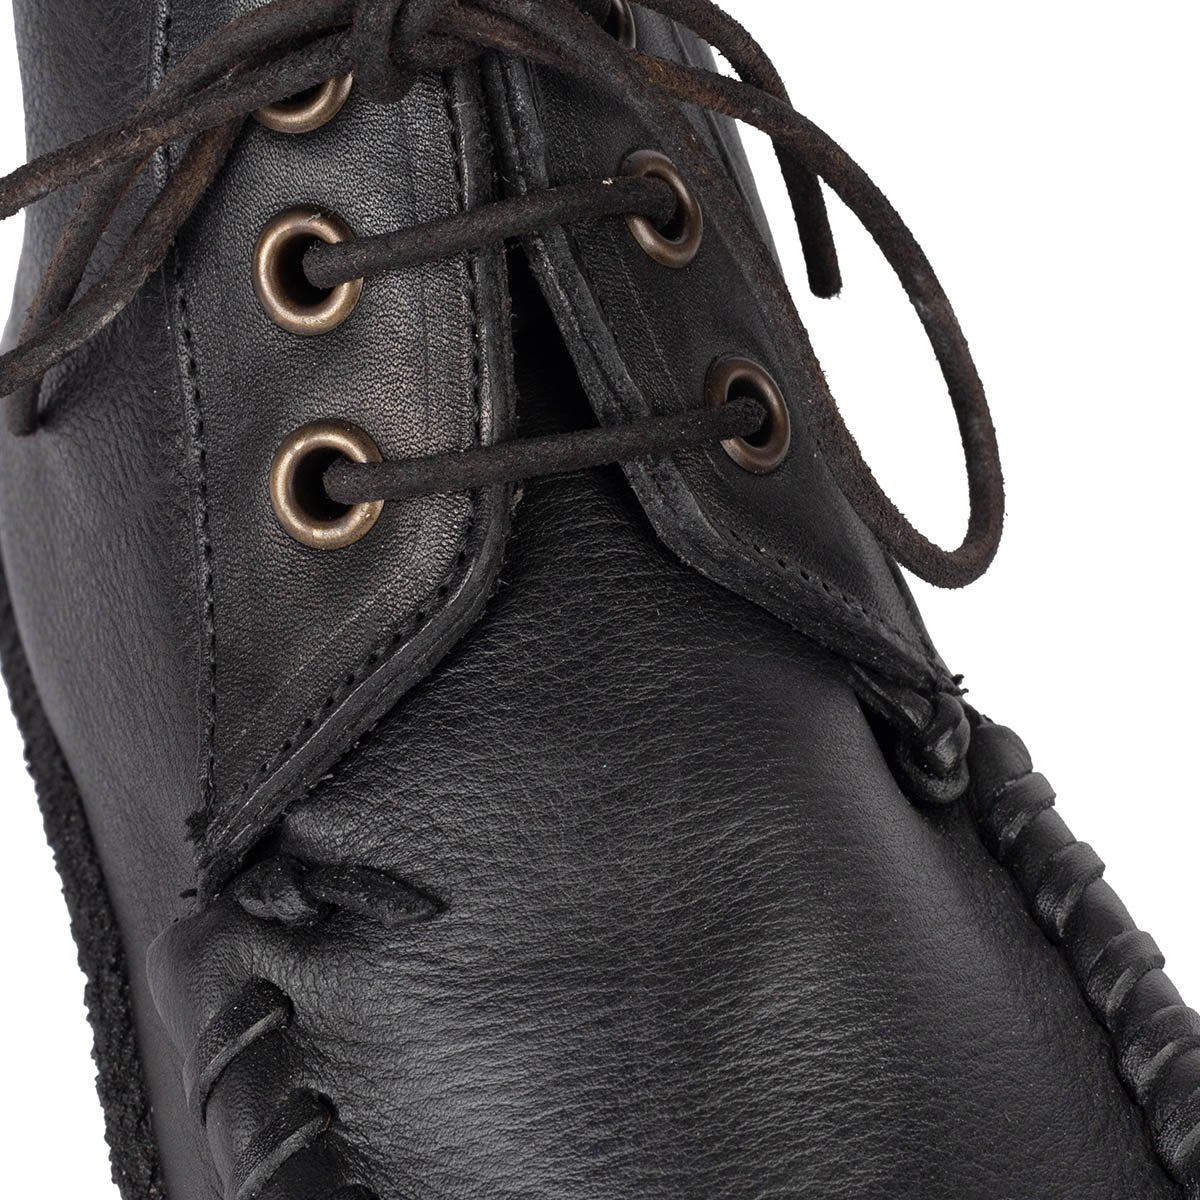 HRN 03 – Black ankle boots